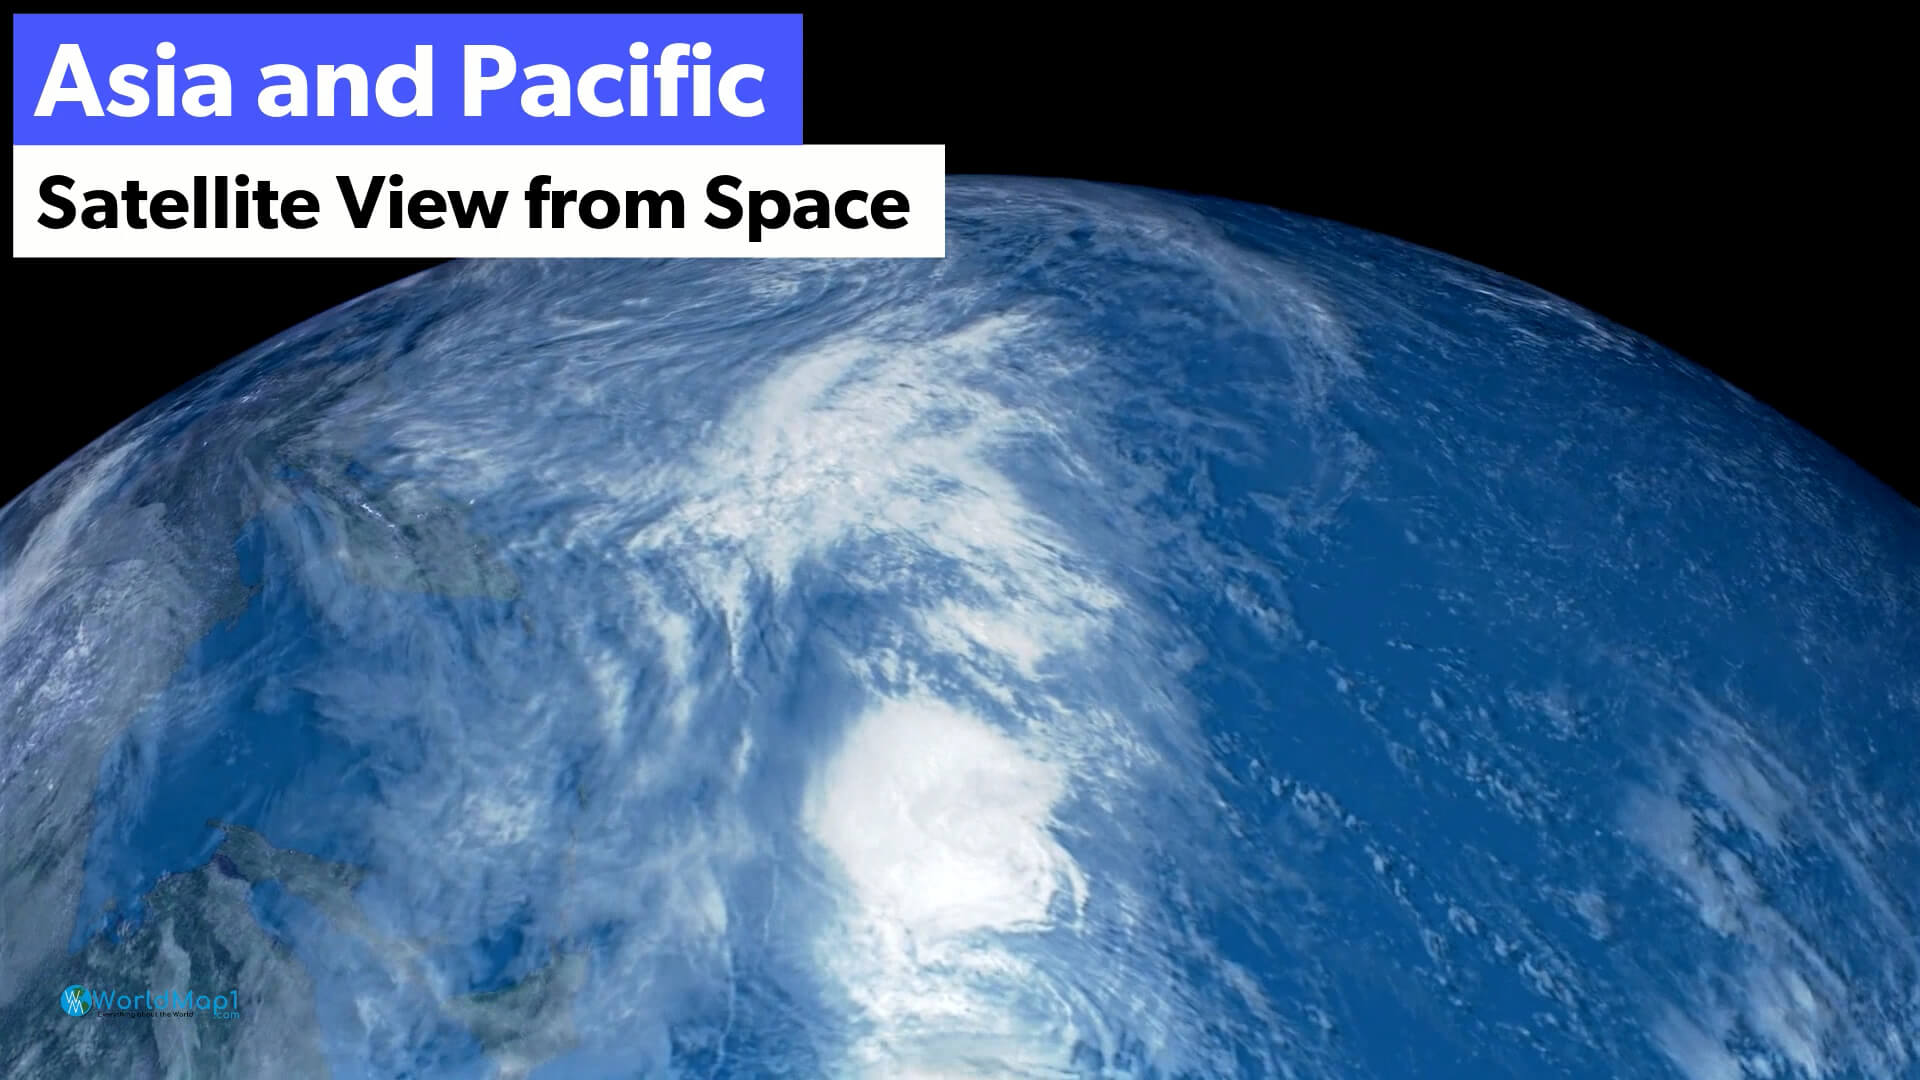 Asia and Pacific Satellite View